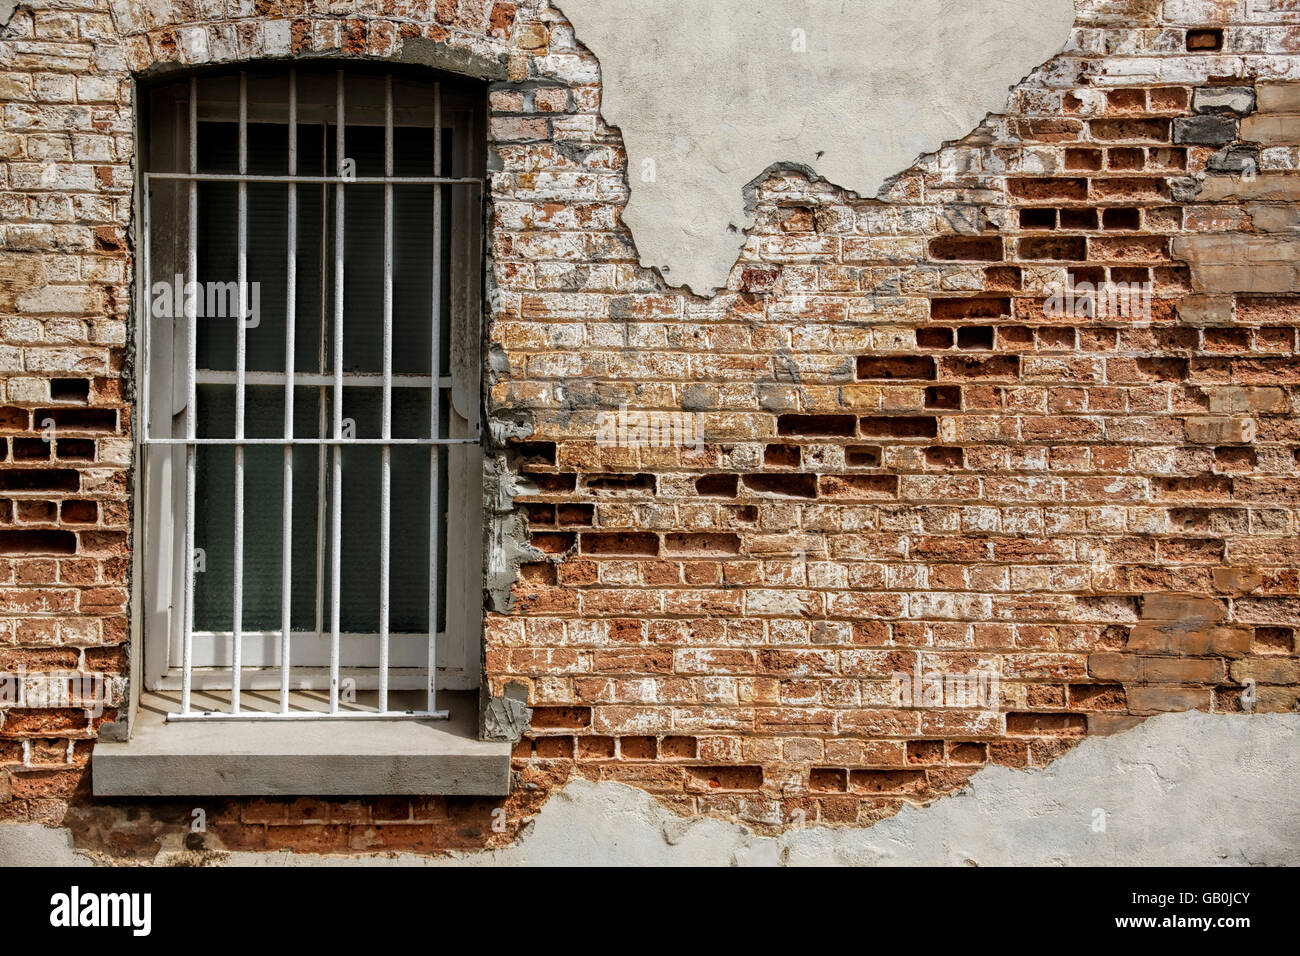 Old window with bars set into decaying clay brick wall, Albany Western Australia Stock Photo